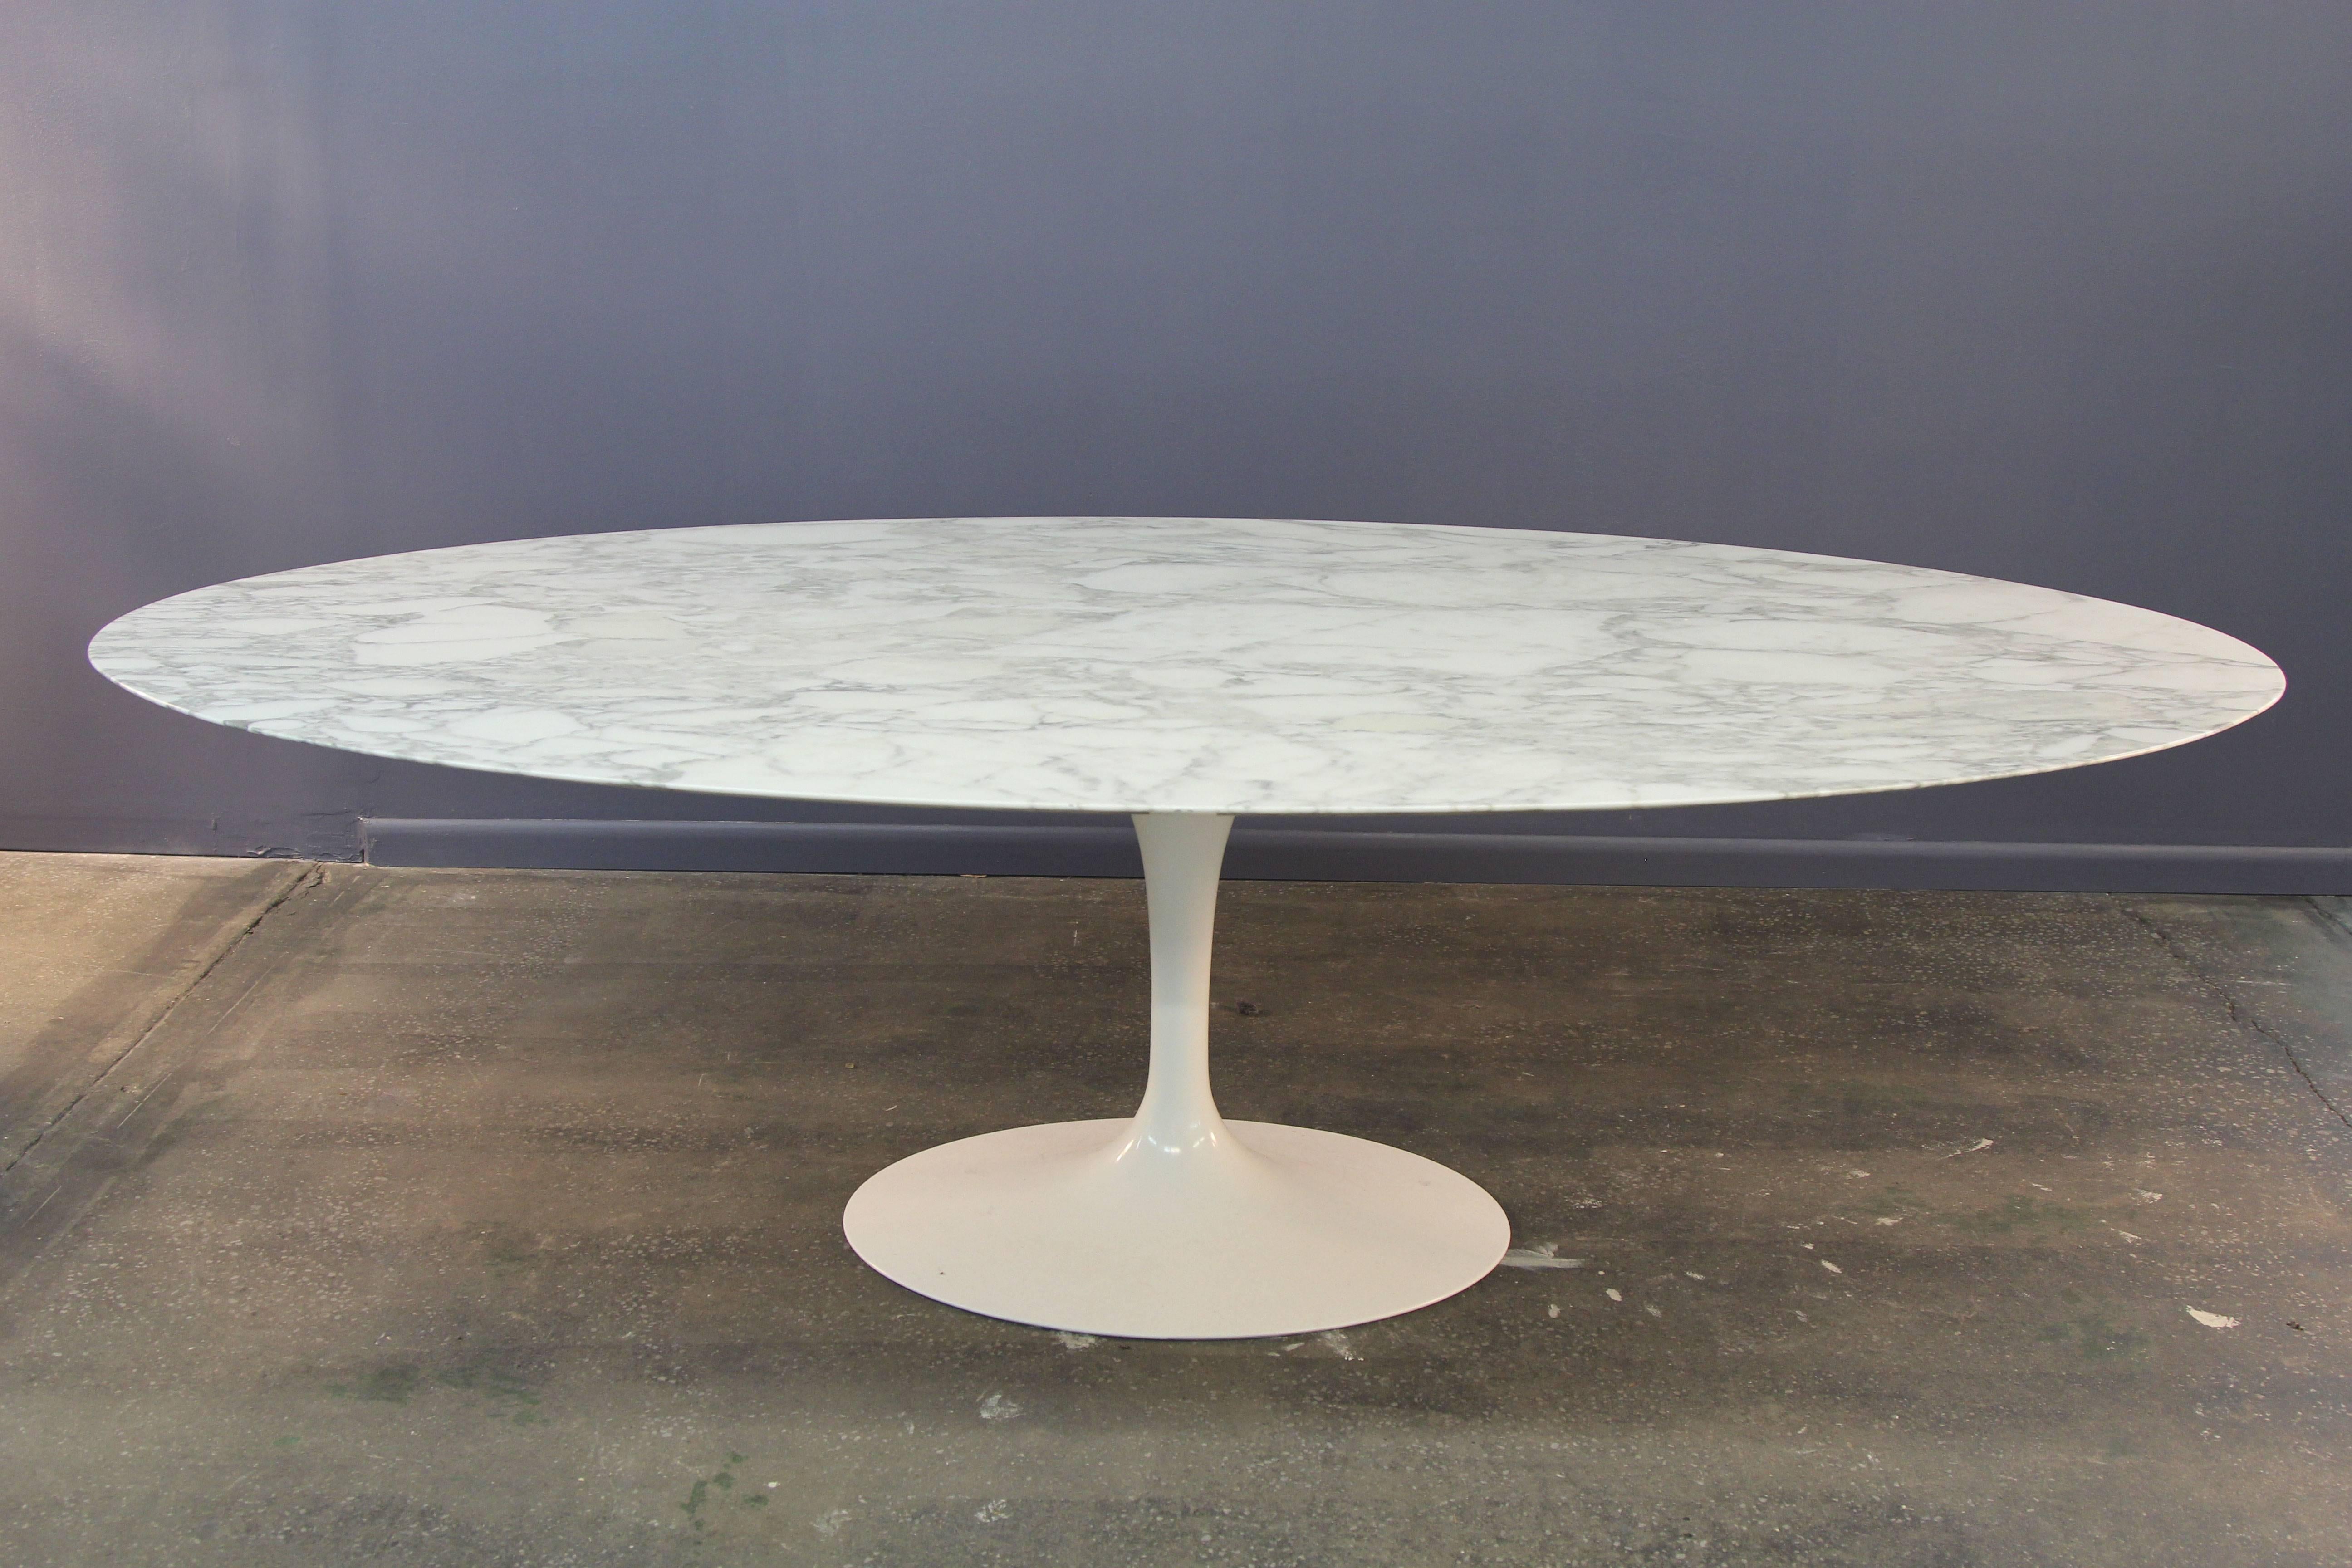 The 96 inch Saarinen in Arabescato marble is an amazing table. Knife edge marble top on white cast aluminum tulip base. Signed Saarinen Knoll. Professionally polished marble.